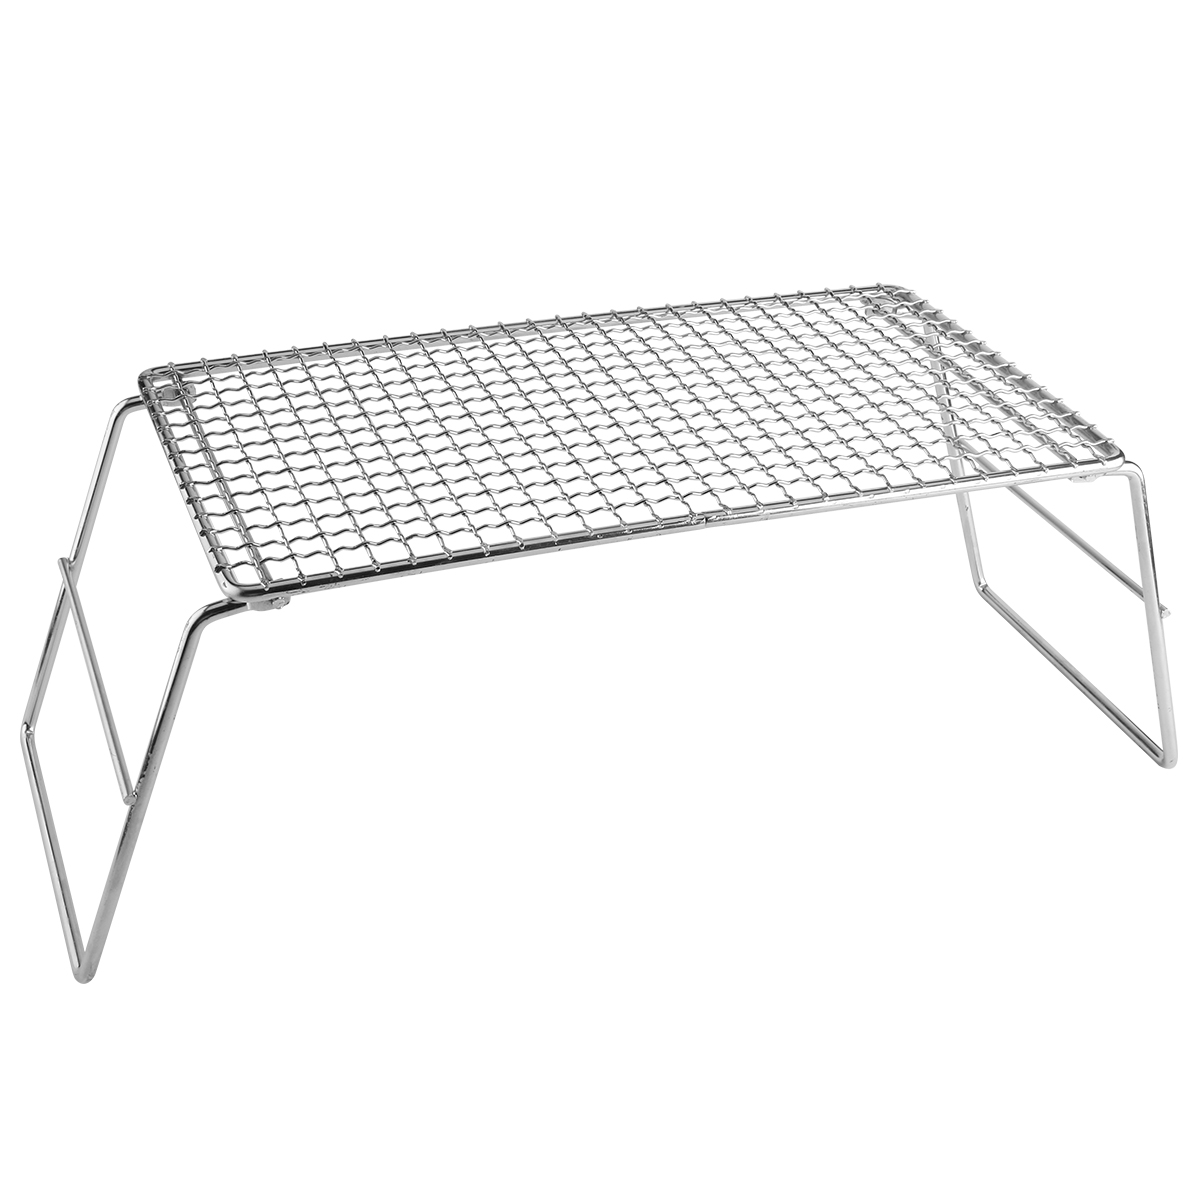 RQ-8108 Outdoor Barbecue Steak Table Grill Mesh